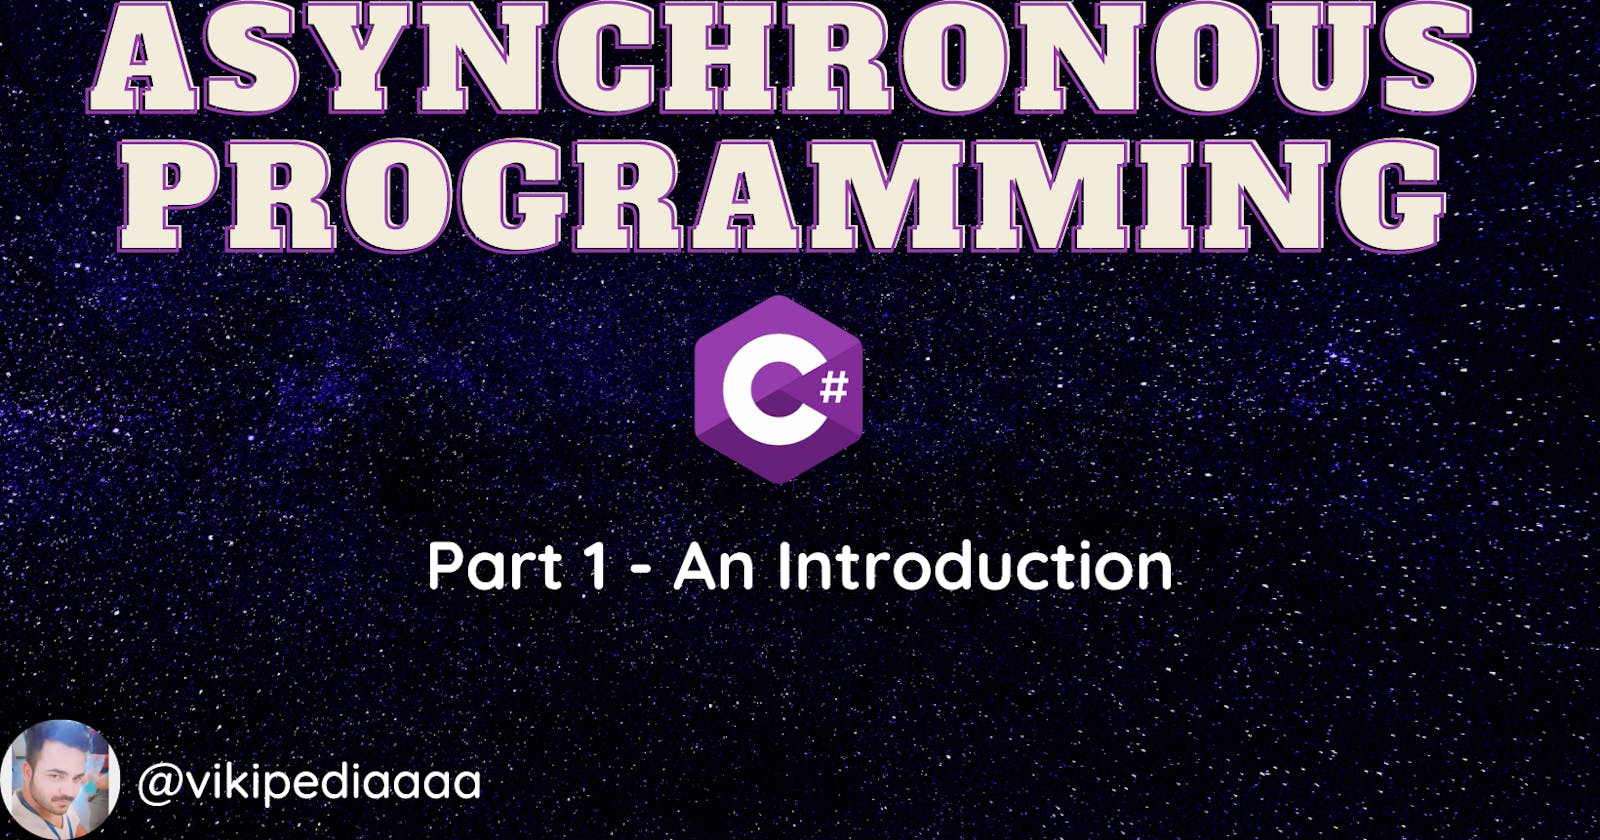 Asynchronous Programming In C#